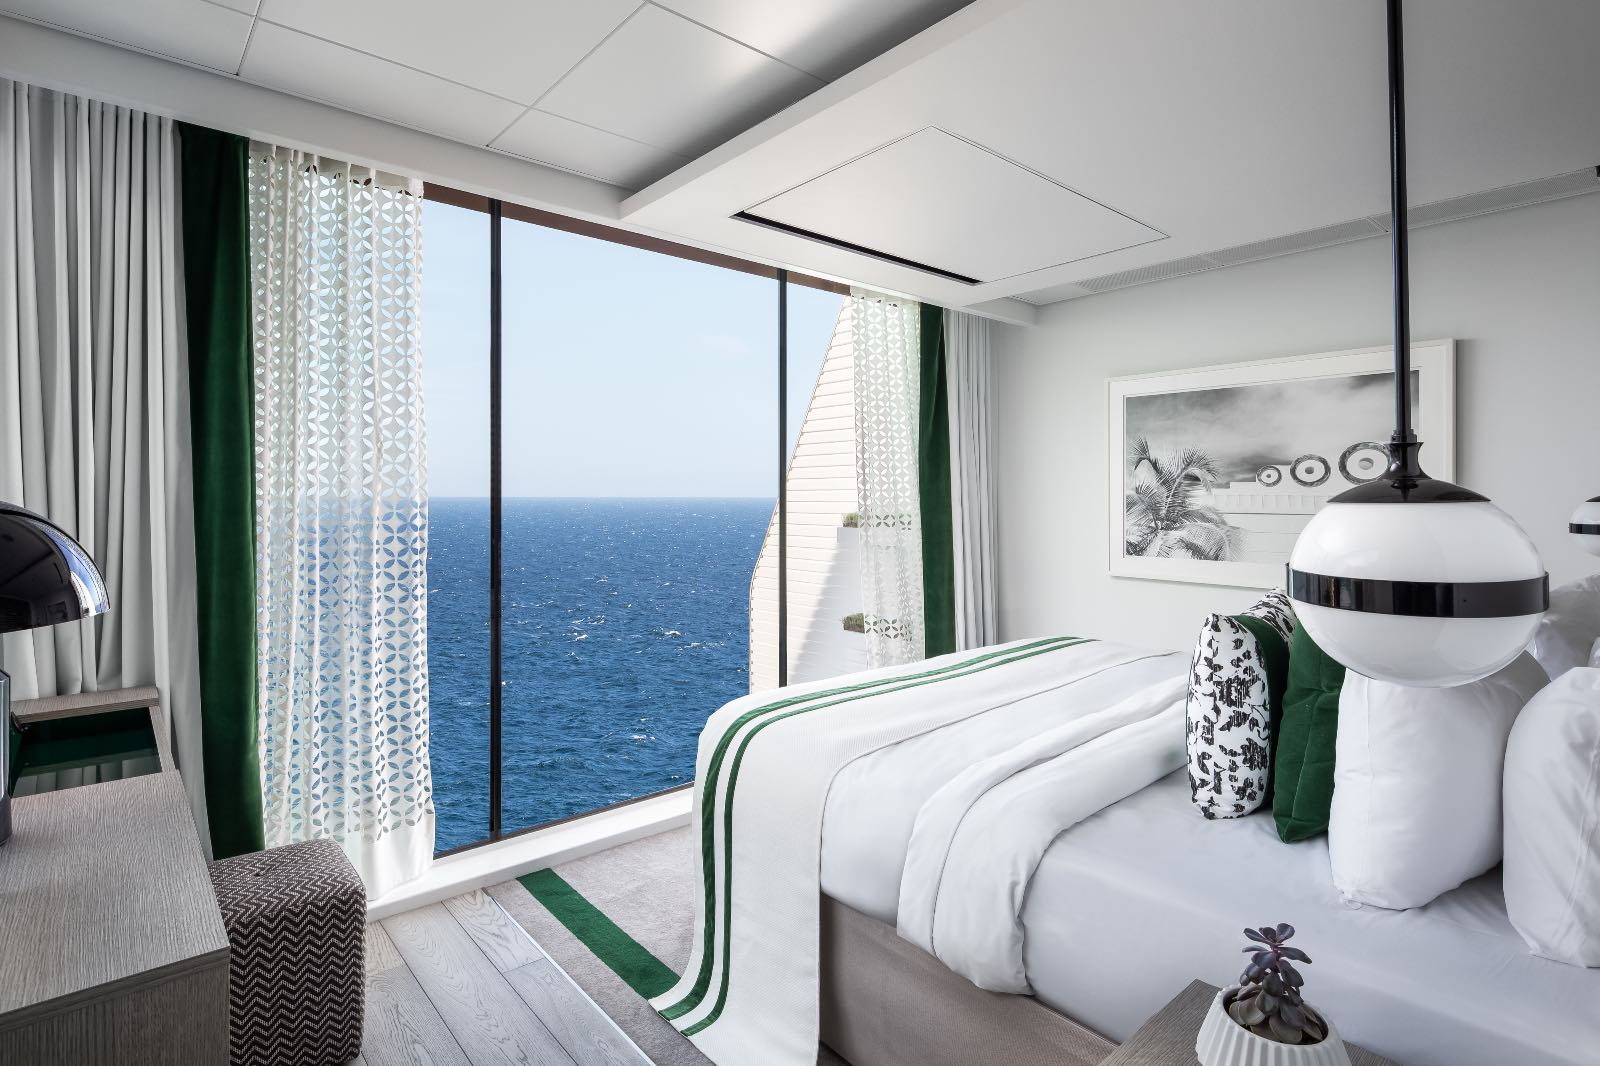 , 6 things to know about Celebrity Edge by Celebrity Cruises